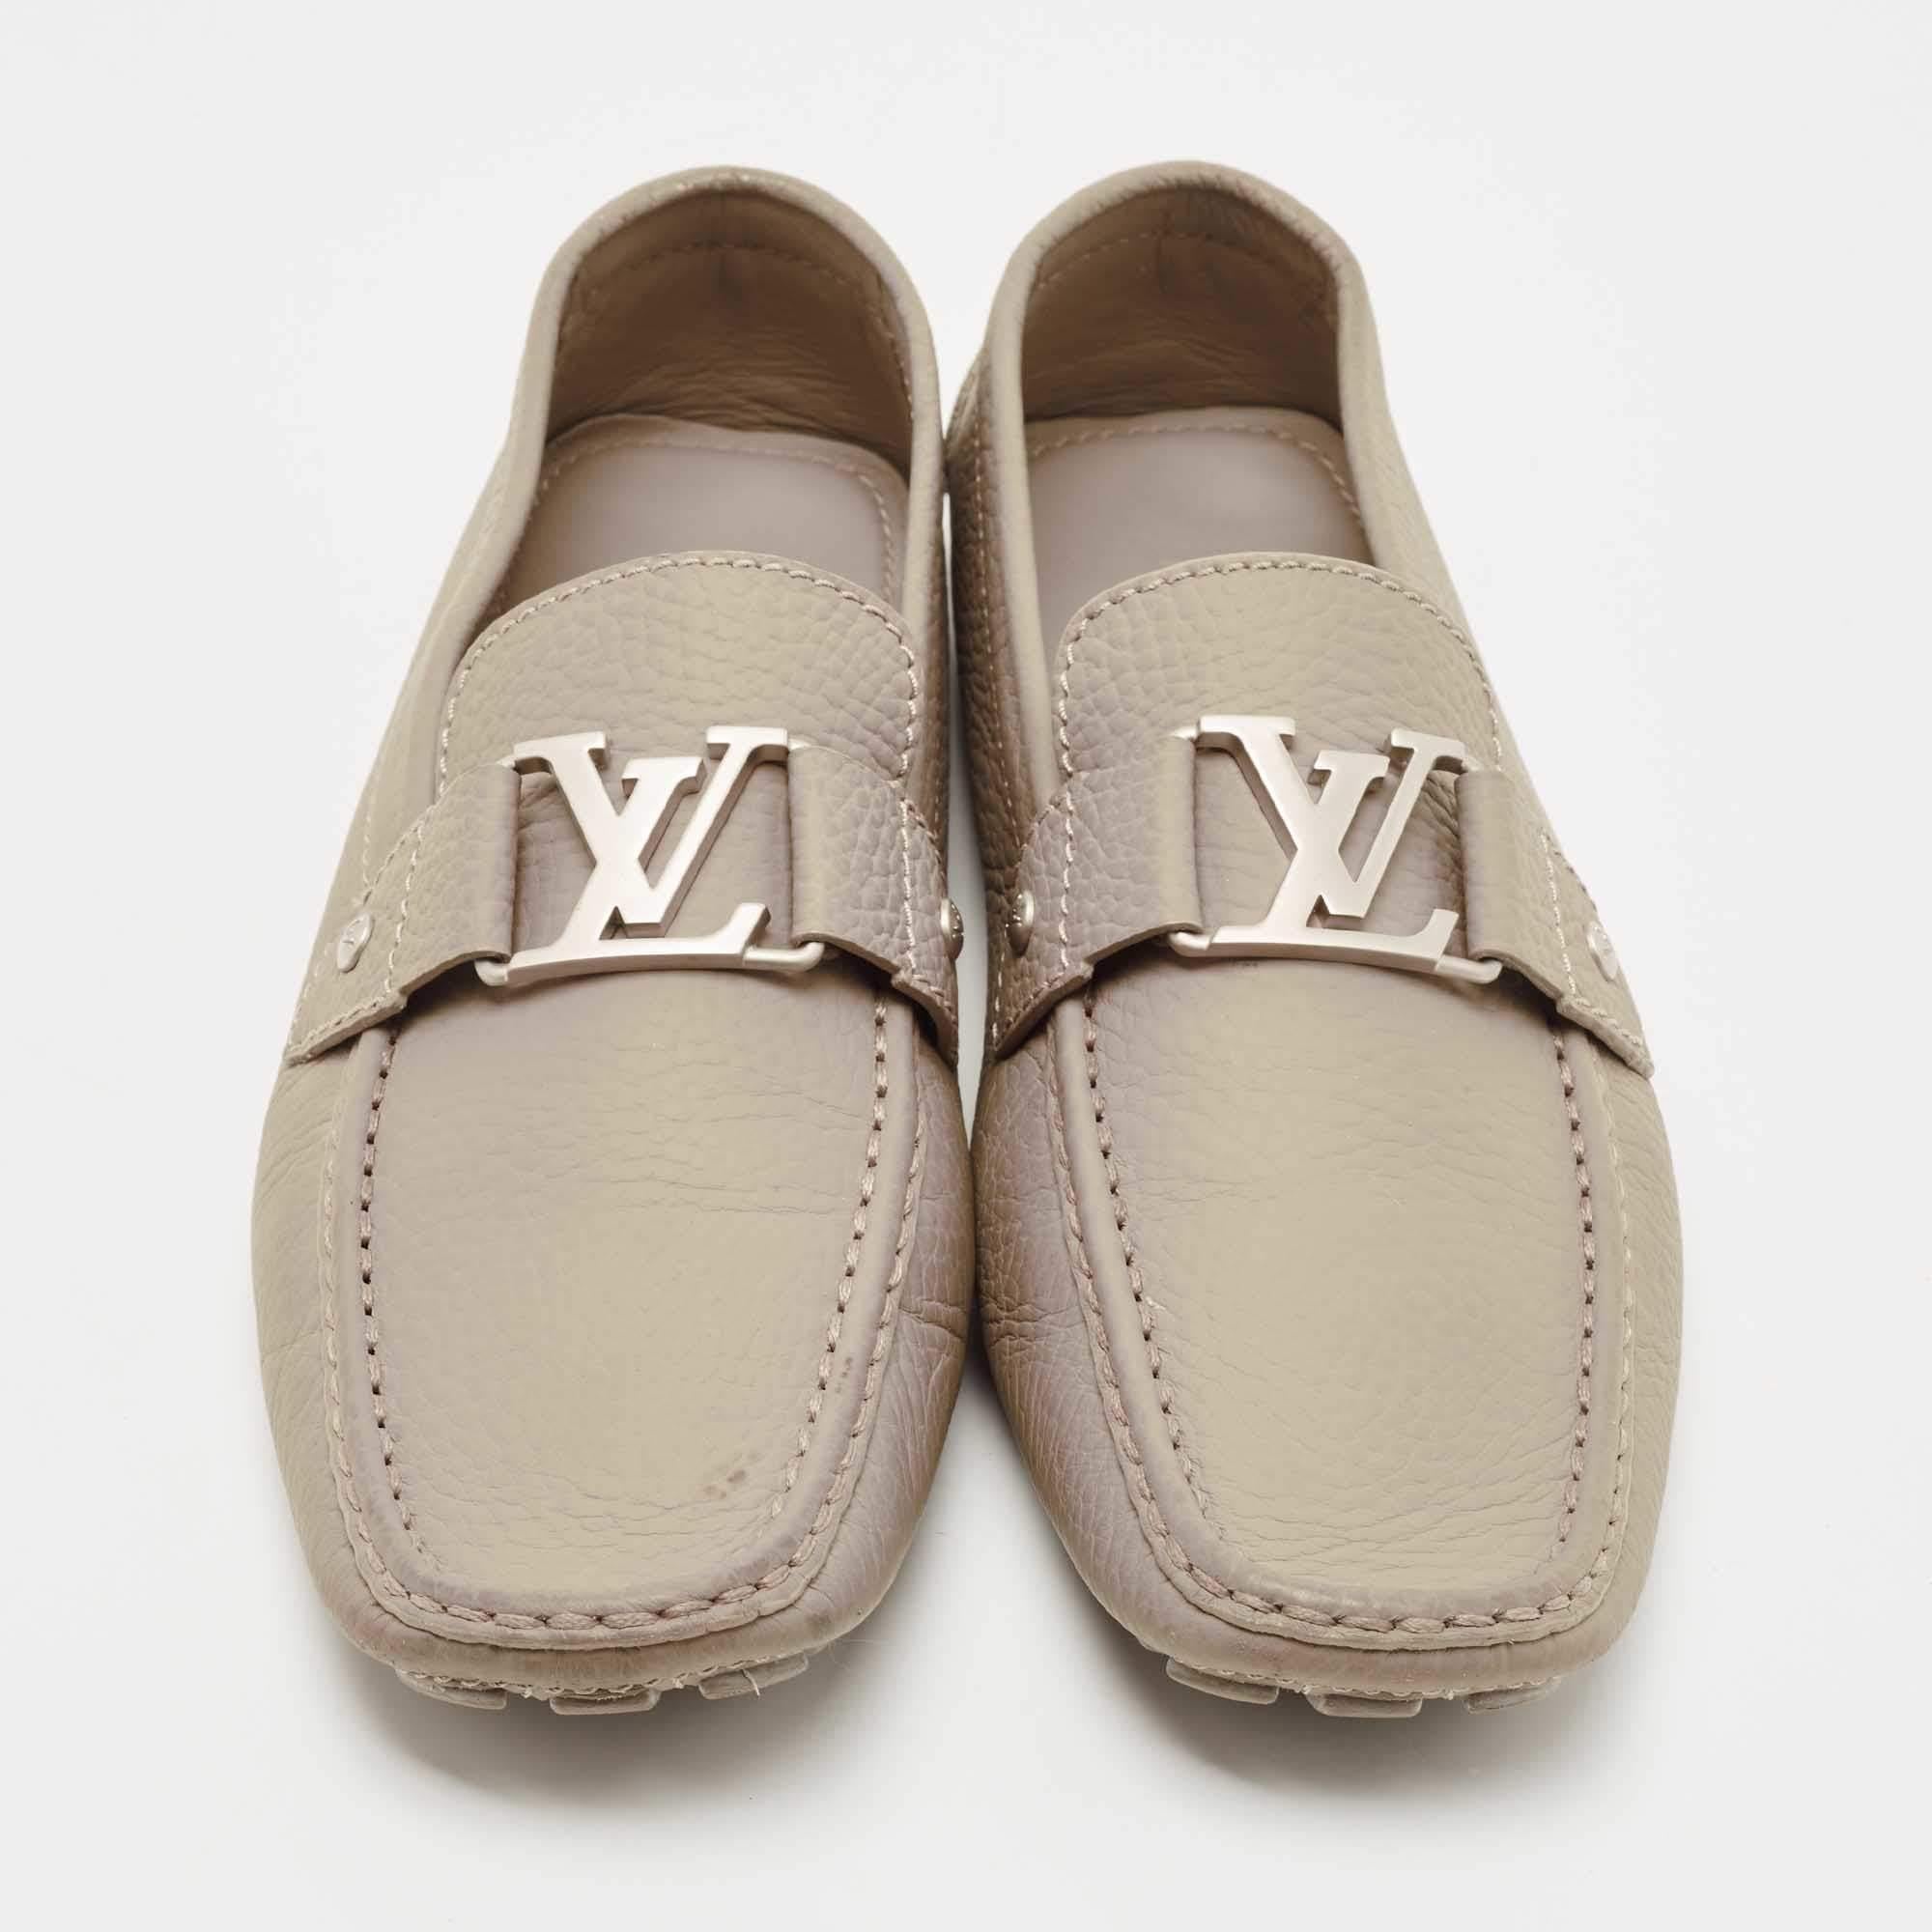 Let this comfortable pair be your first choice when you're out for a long day. These Louis Vuitton shoes have well-sewn uppers beautifully set on durable soles.

